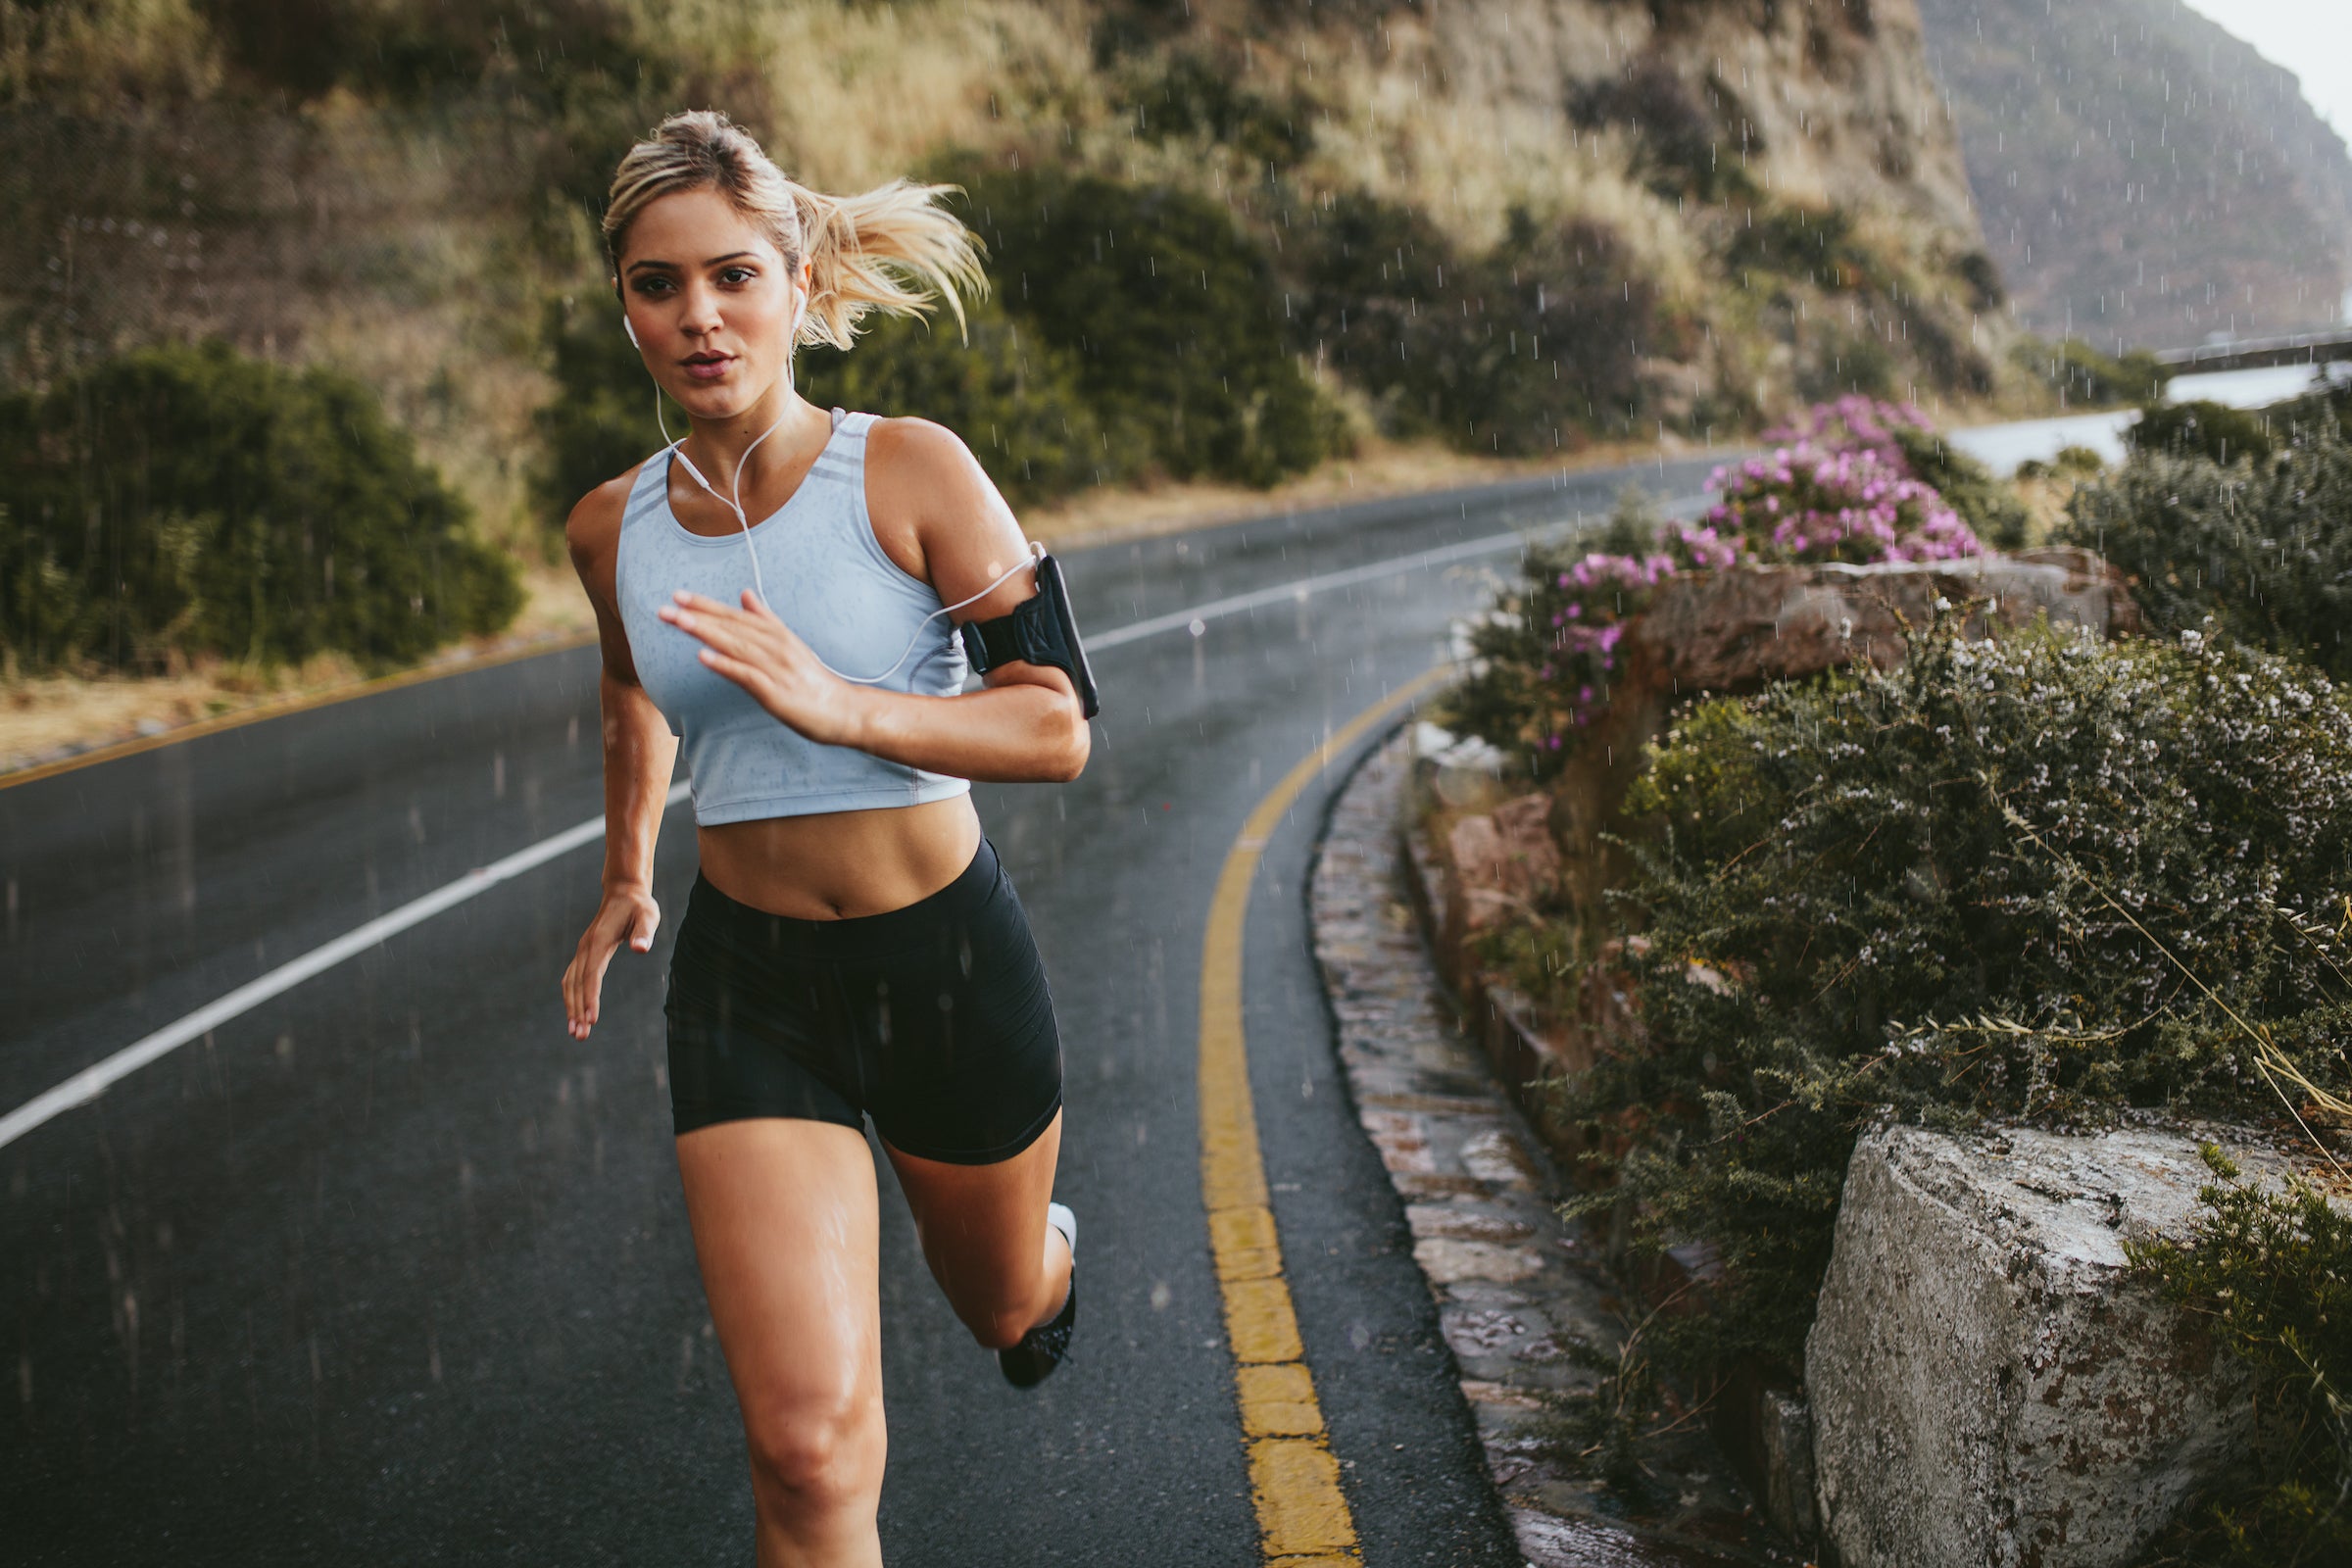 10-Week Training Program To Boost Your Speed - Women's Running, speed  running training 